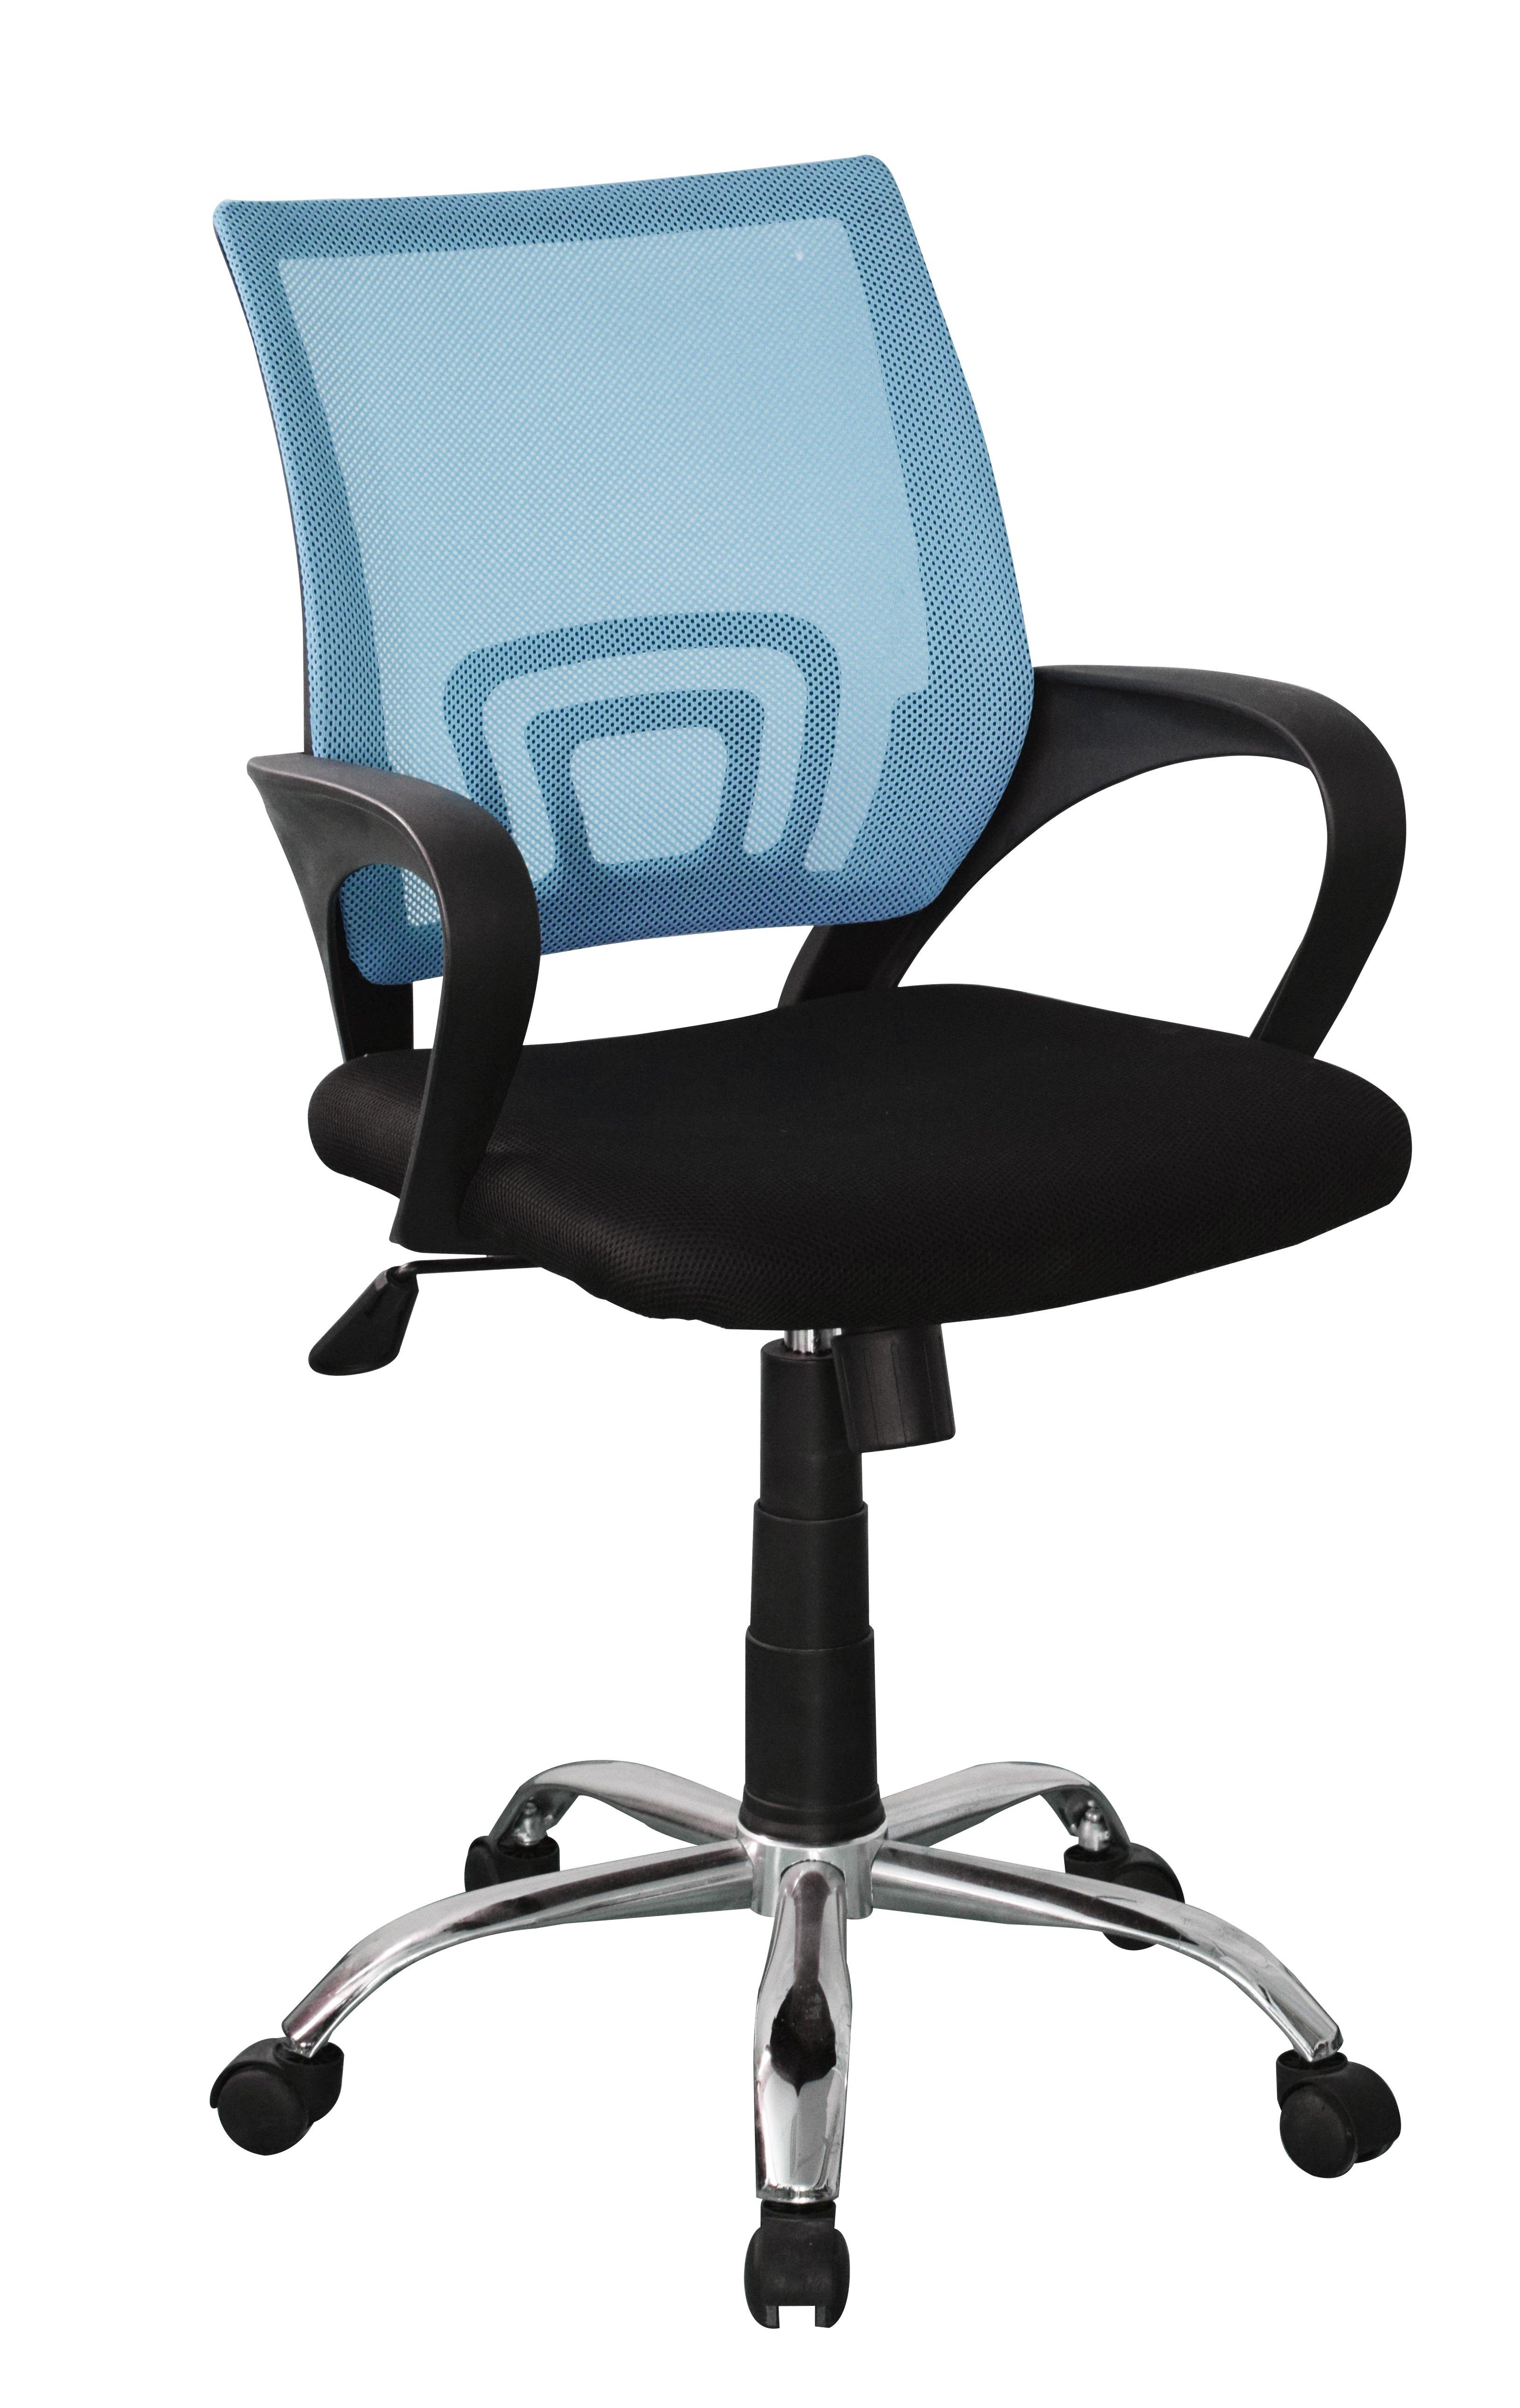 Loft Home Office Study Chair, Blue Mesh Back, Black Fabric Seat With Chrome Base